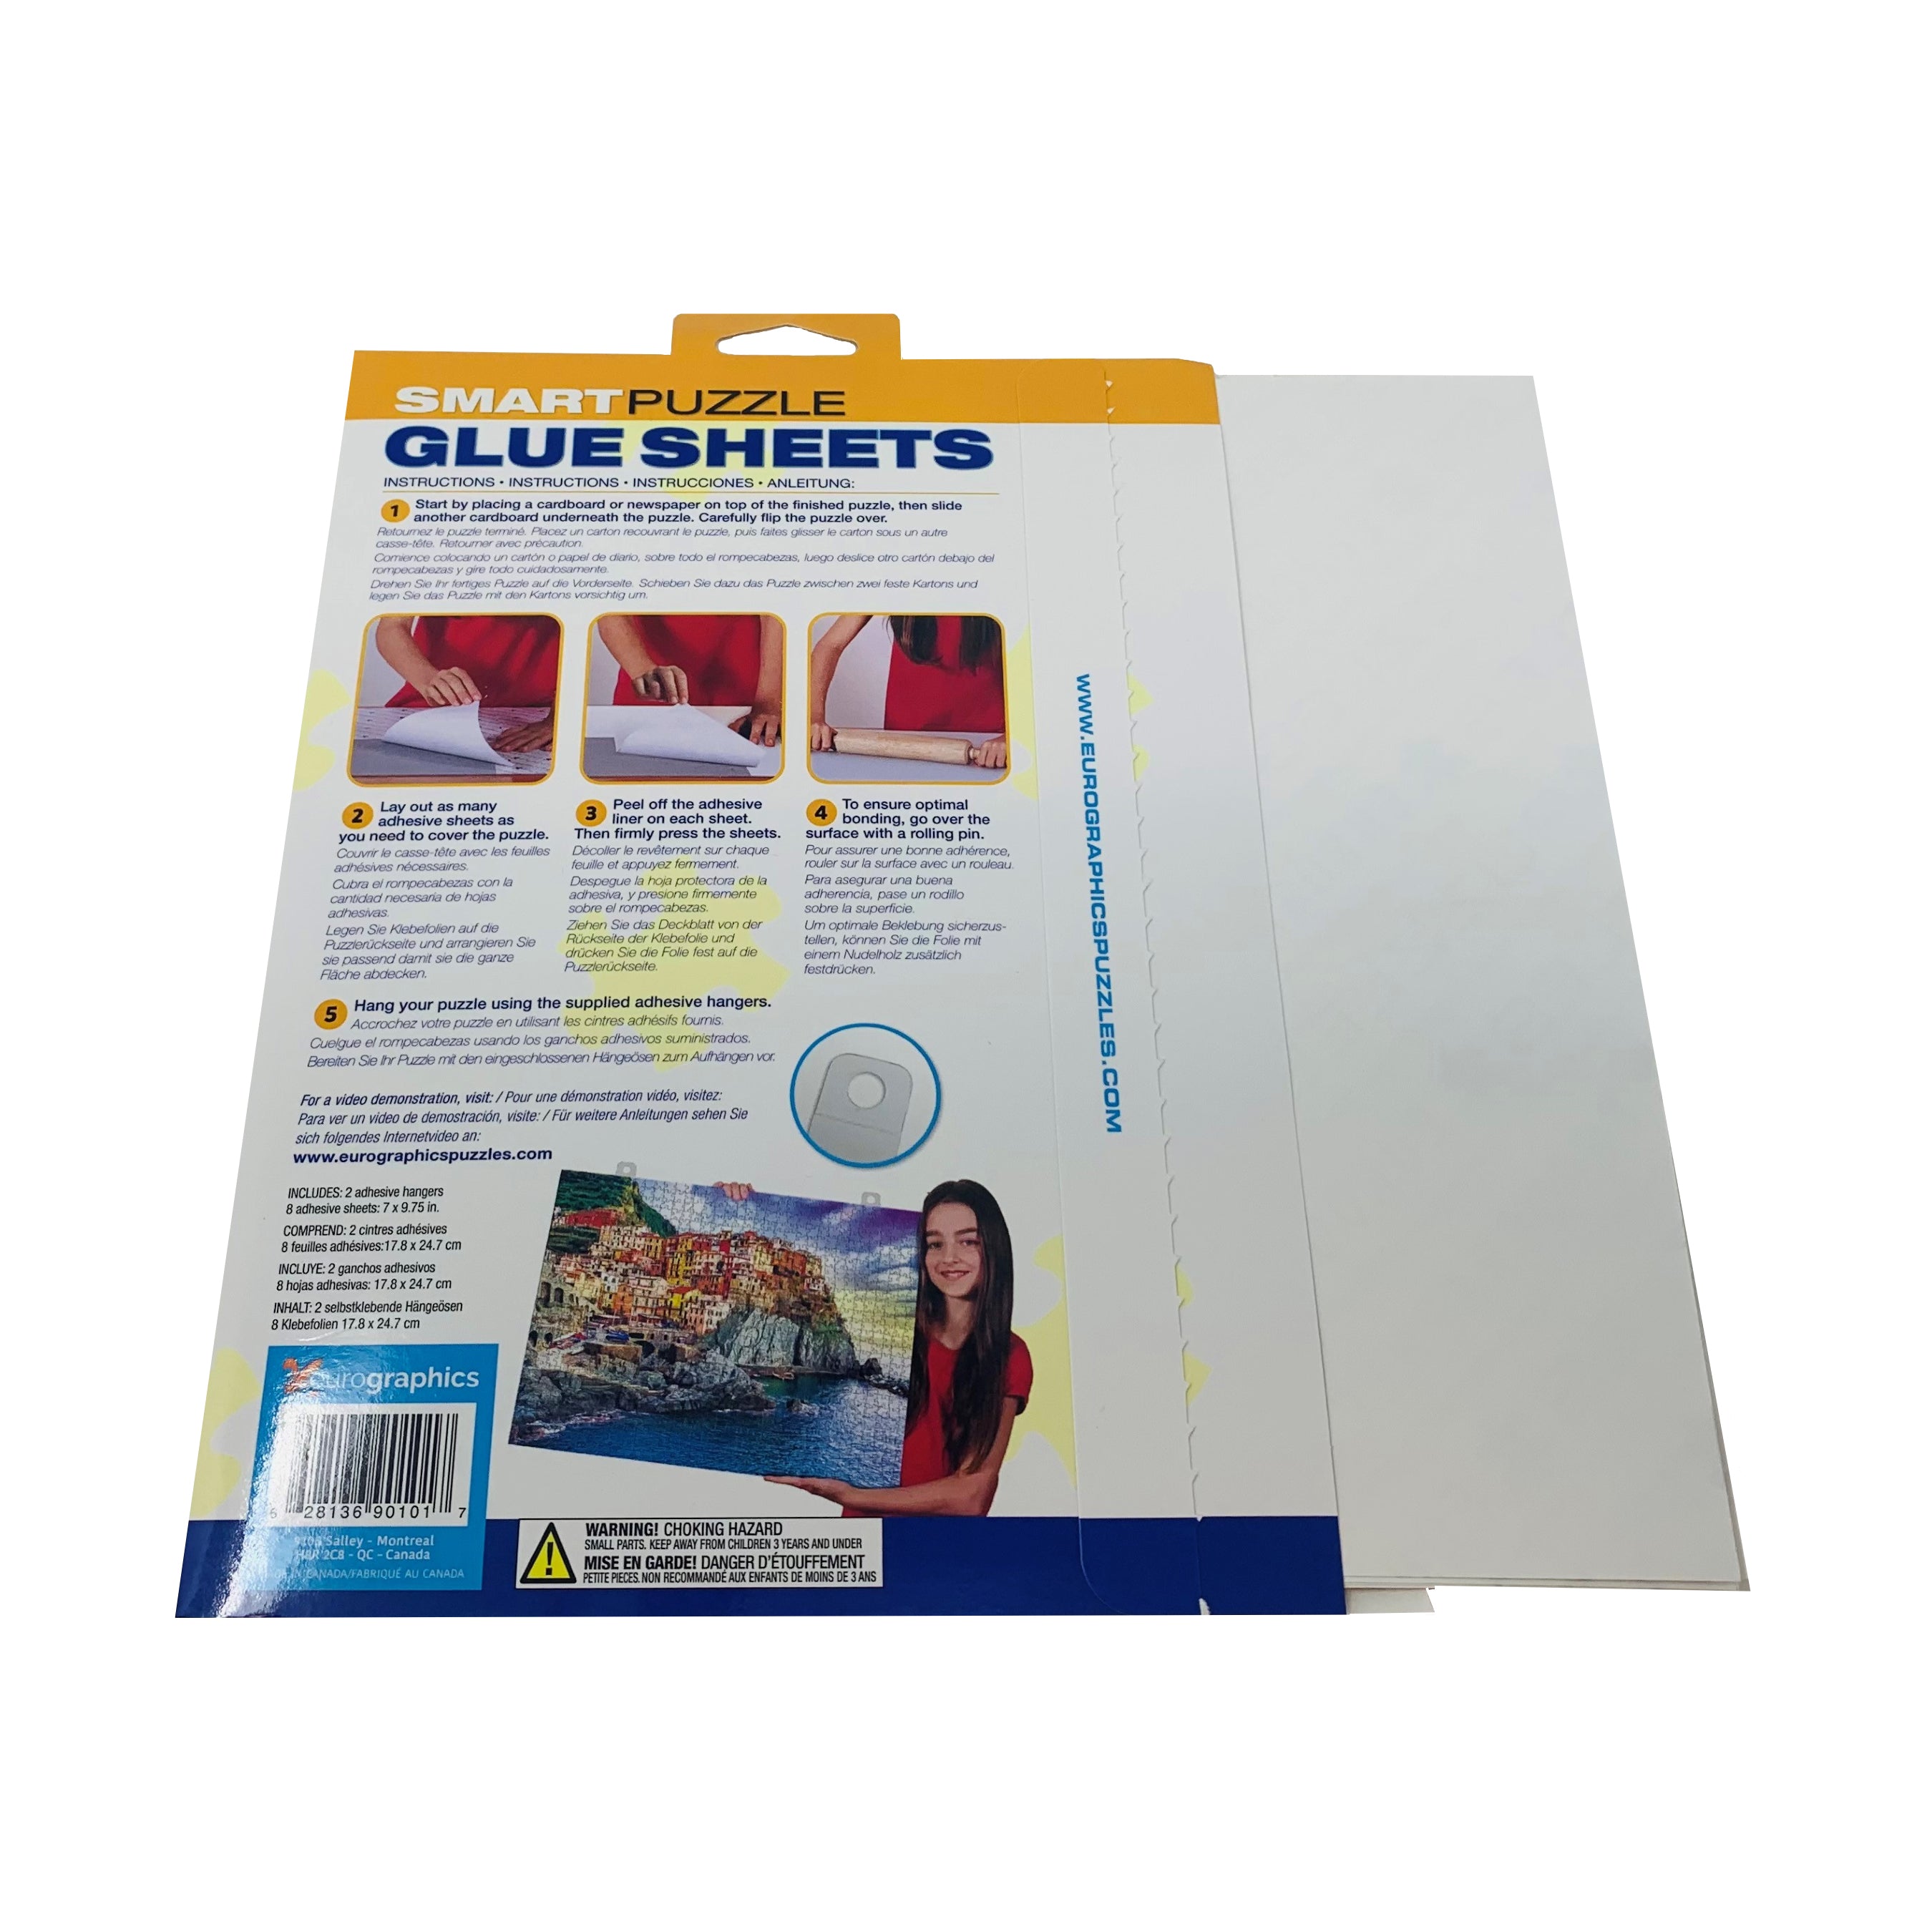 How to Use Your Smart Puzzle Glue Sheets